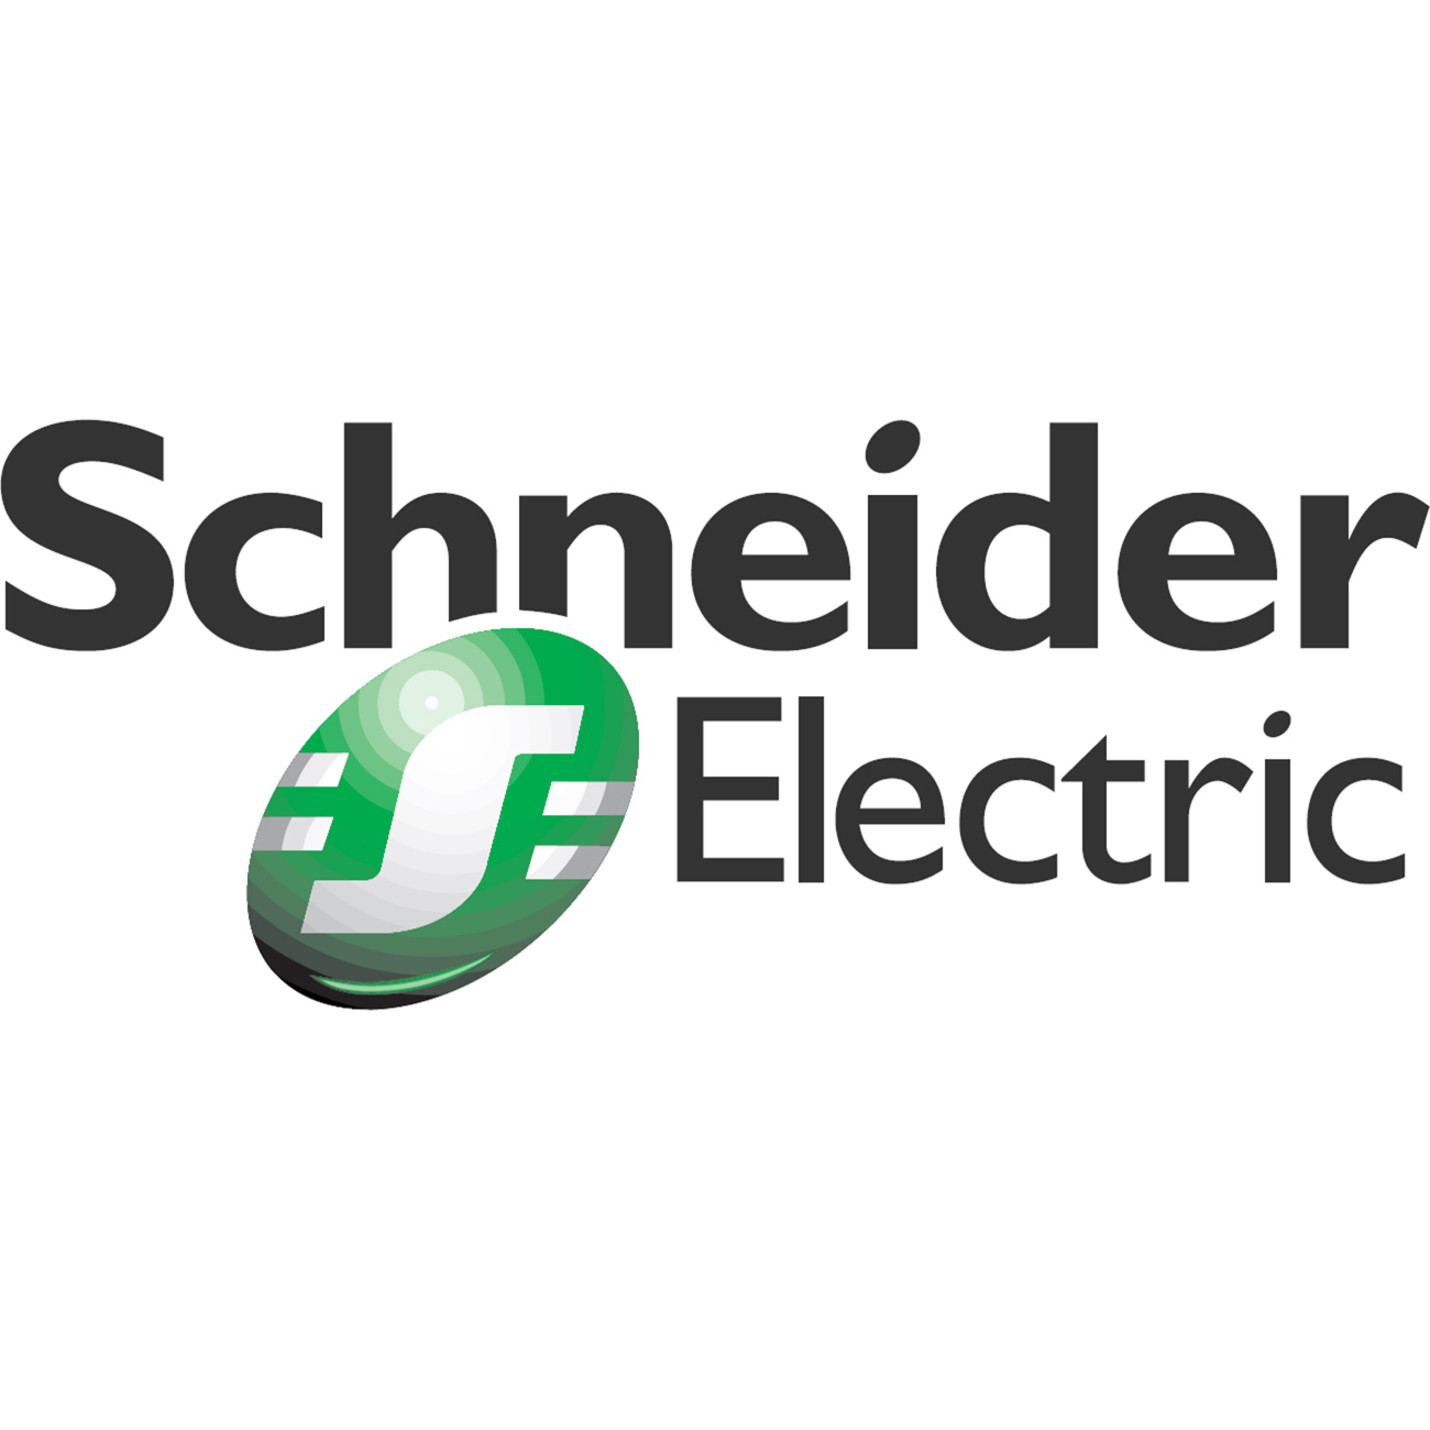 APC by Schneider Electric Start-Up ServiceService8 x 5Installation and StartupLaborElectronic and Physical WSTRTUP-PX-23